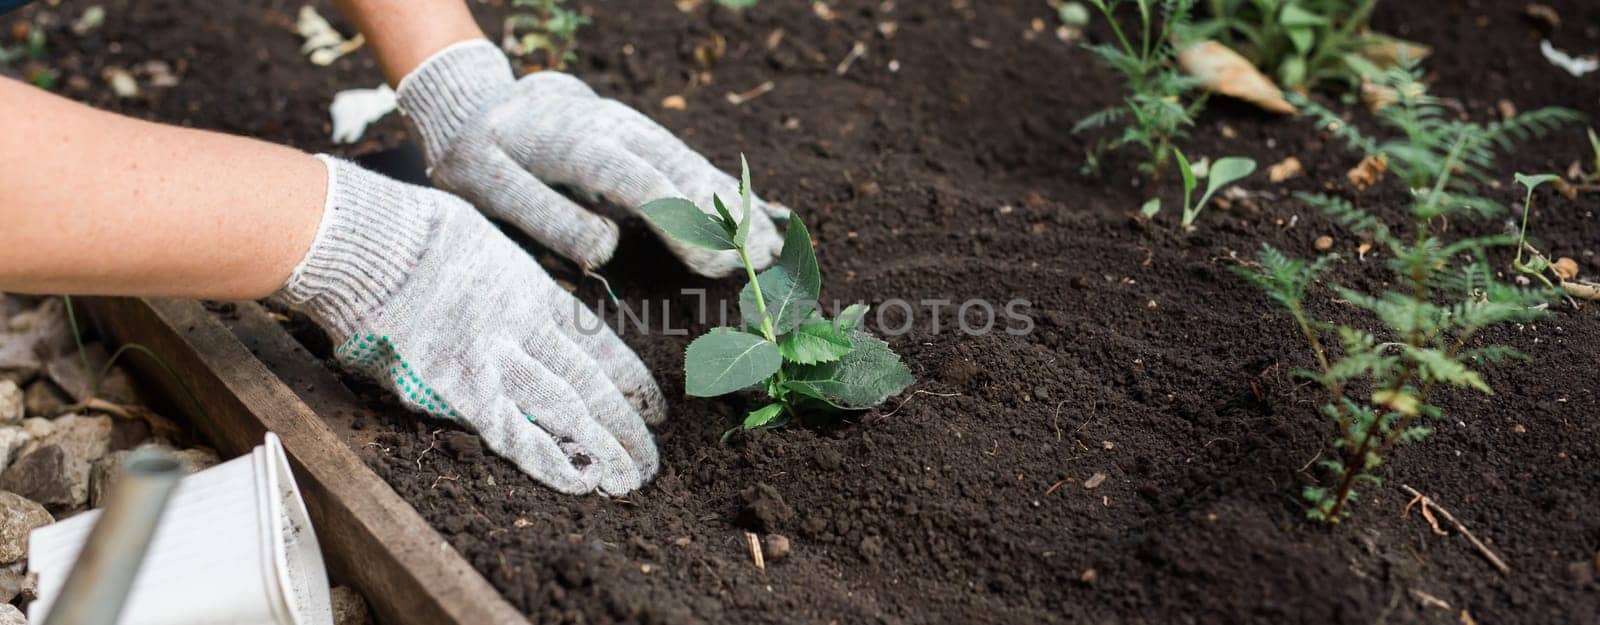 Hand of woman gardener in gloves holds seedling of small apple tree in her hands preparing to plant it in the ground. Tree planting